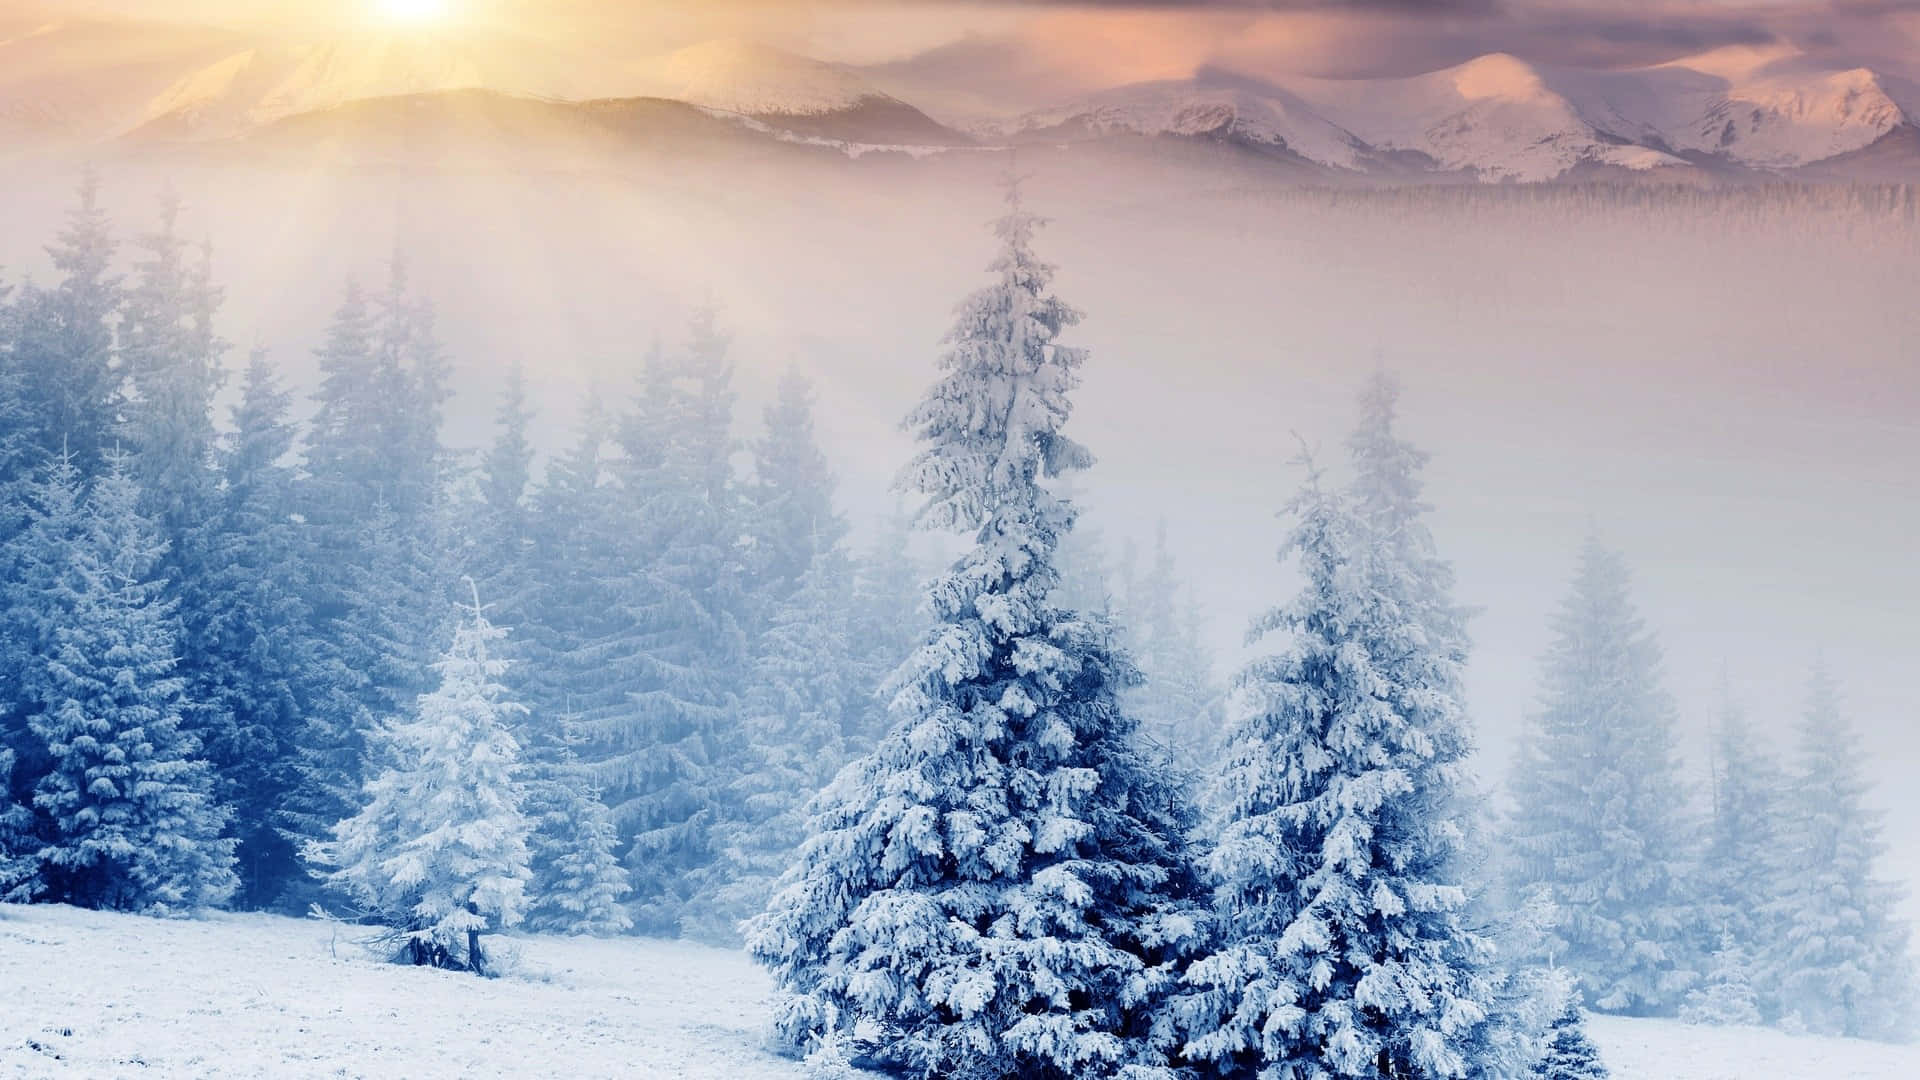 Winter Beauty in the Mountains Wallpaper